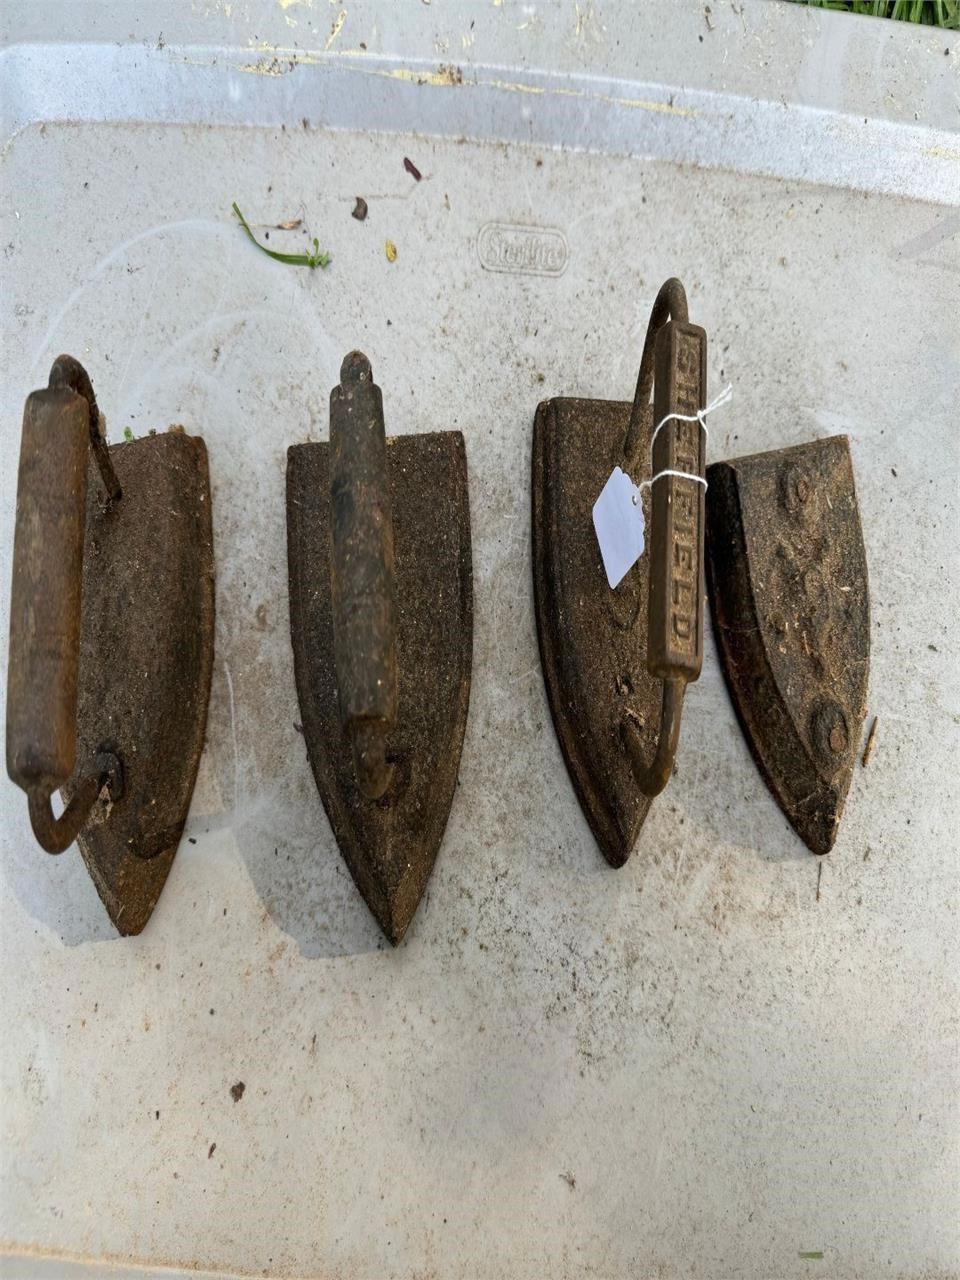 4 antique irons, one missing handle